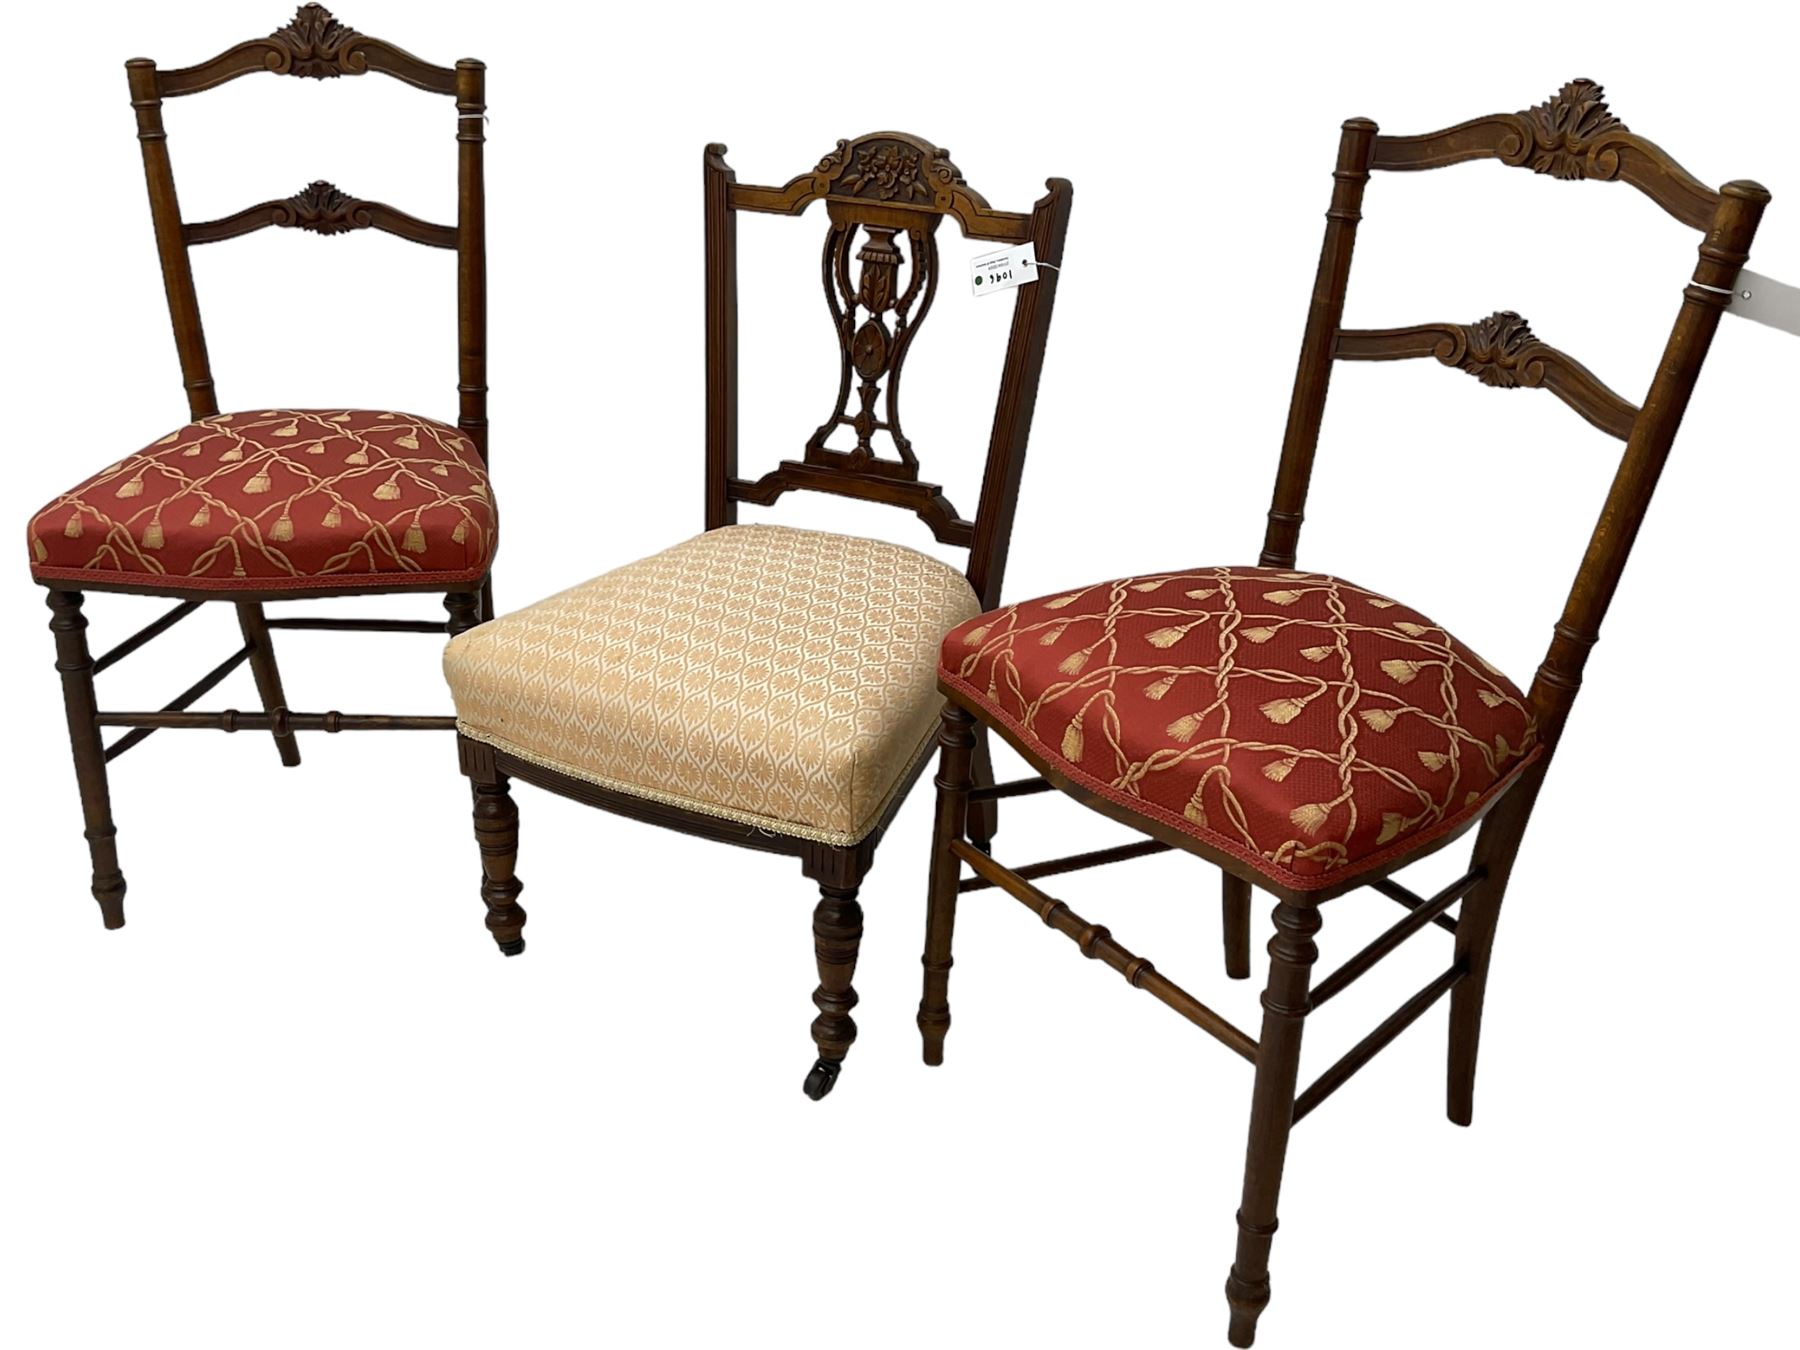 Pair of late 19th century walnut bedroom chairs - Image 4 of 4